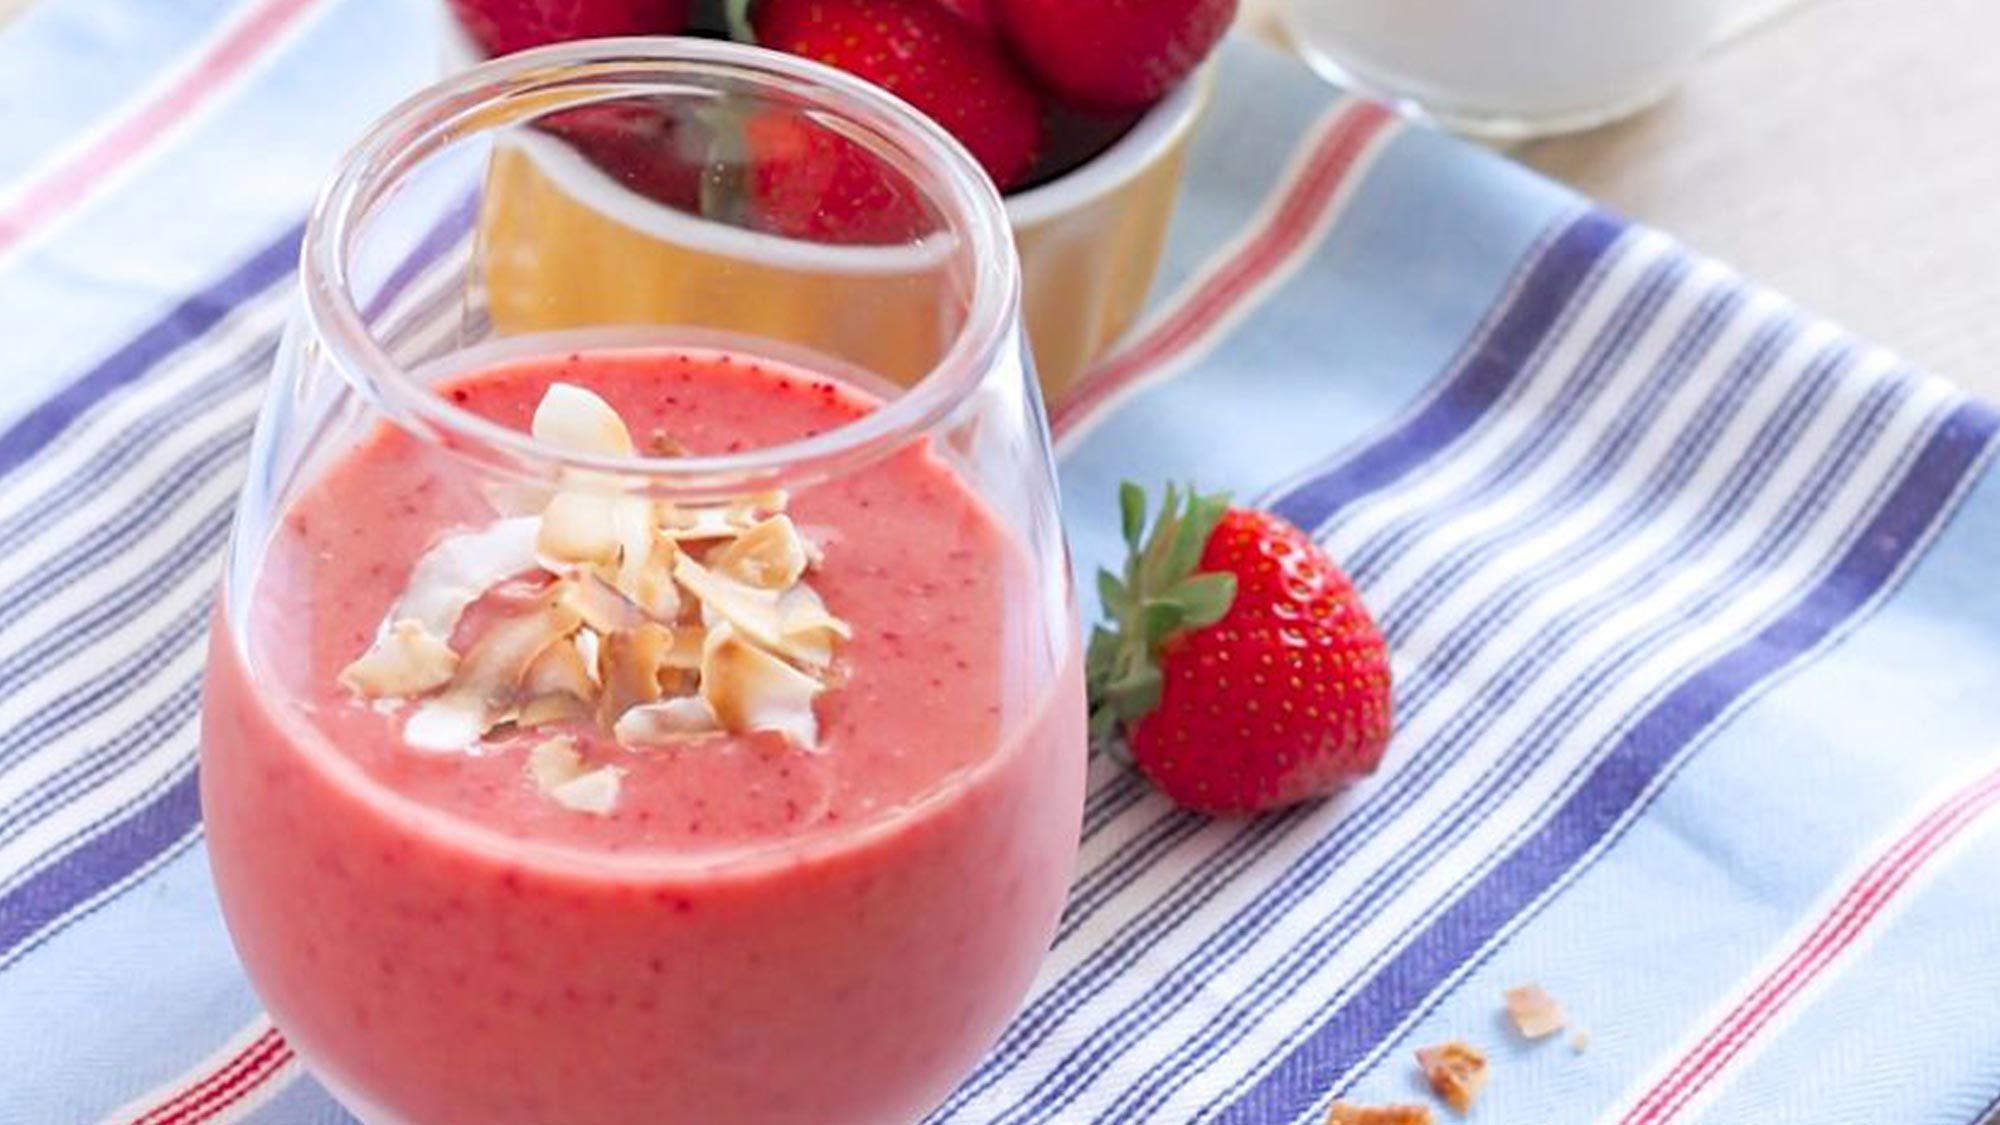 Strawberry Banana Protein Smoothie with Coconut